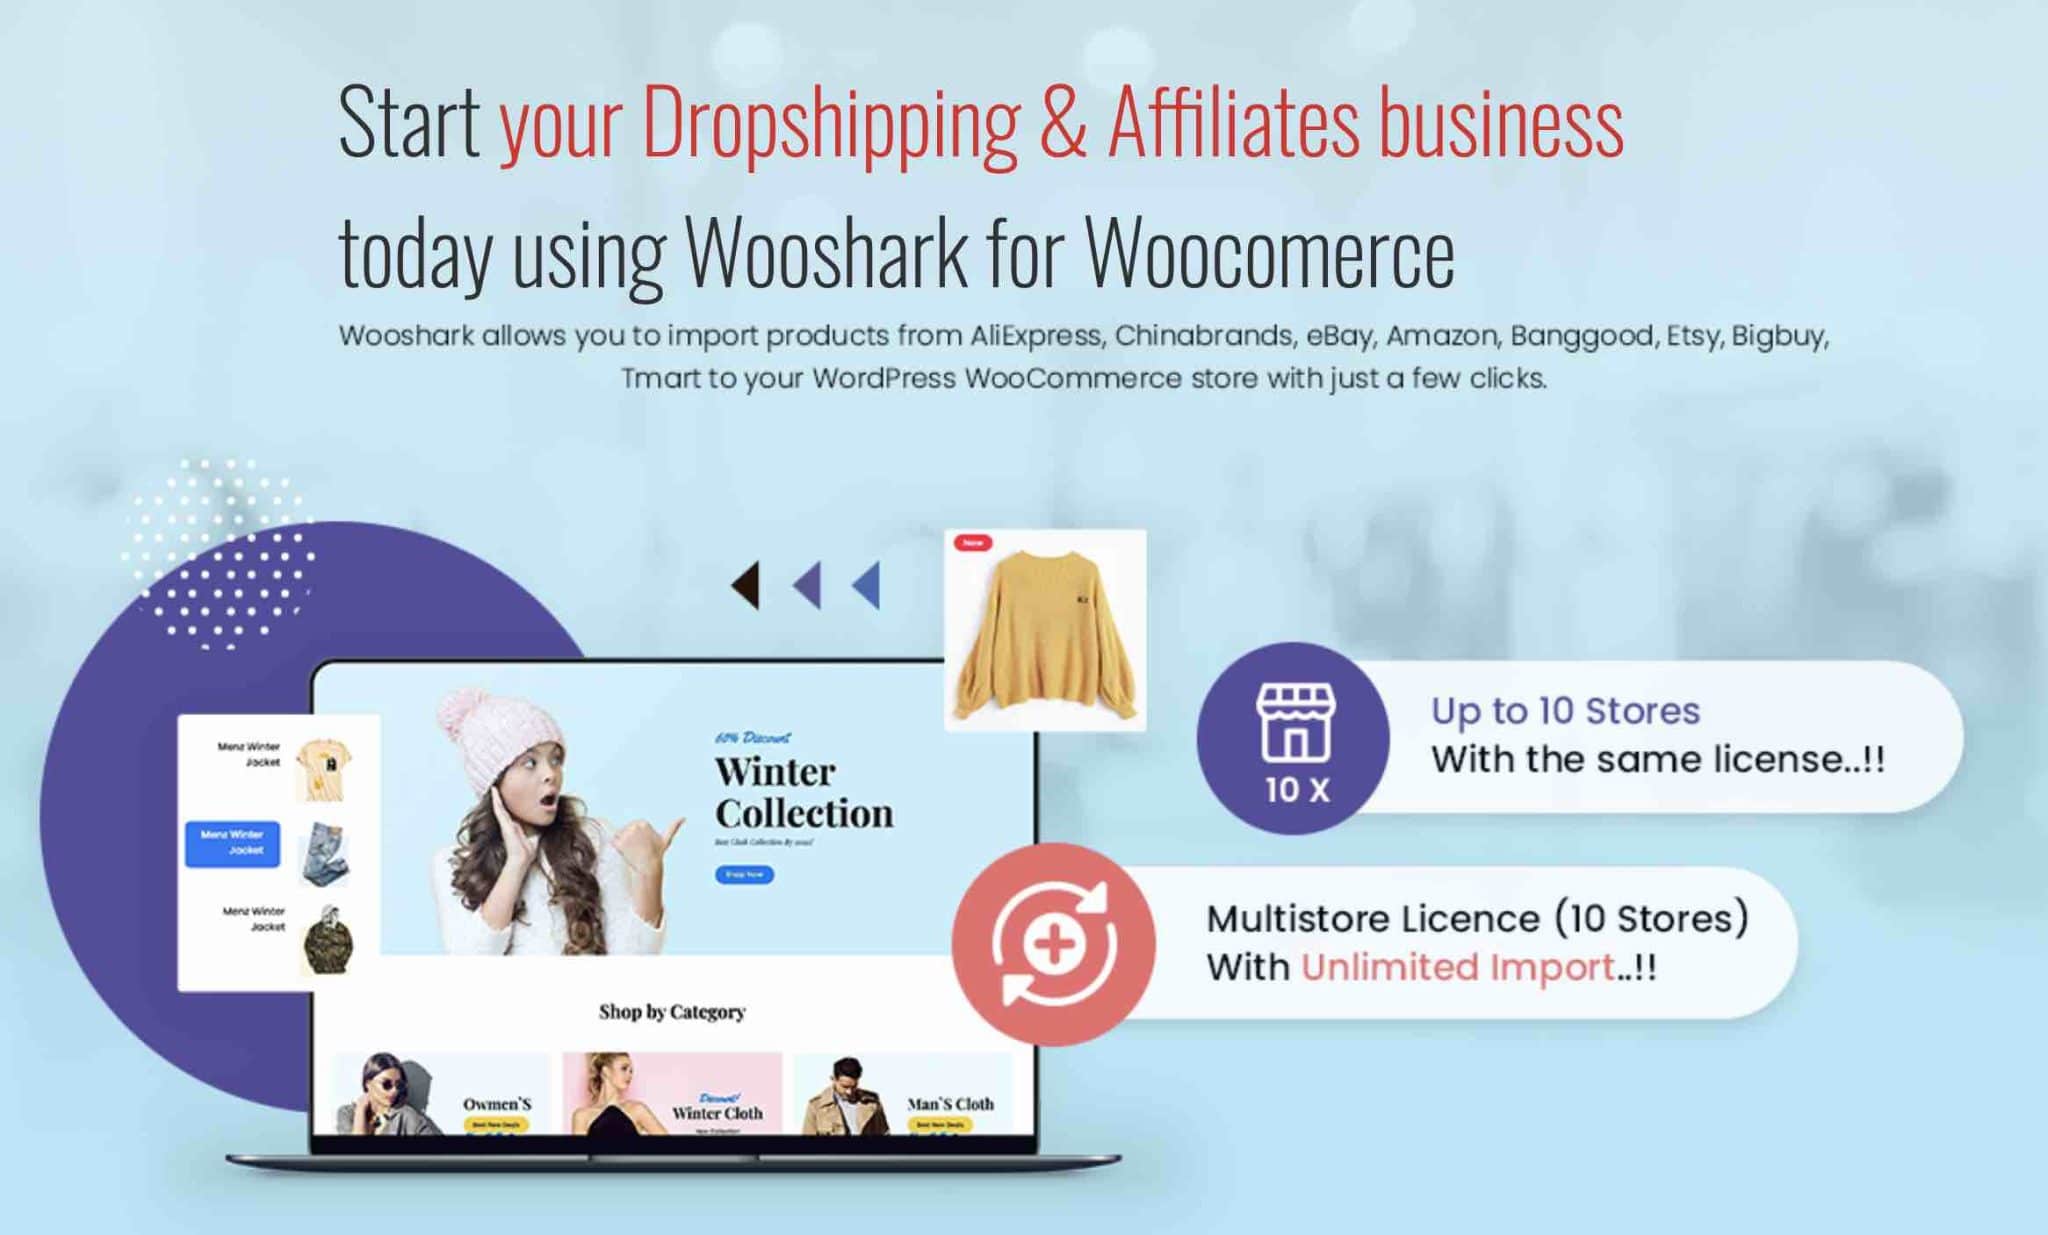 Wooshark is a WordPress dropshipping plugin that works with a Chrome extension.